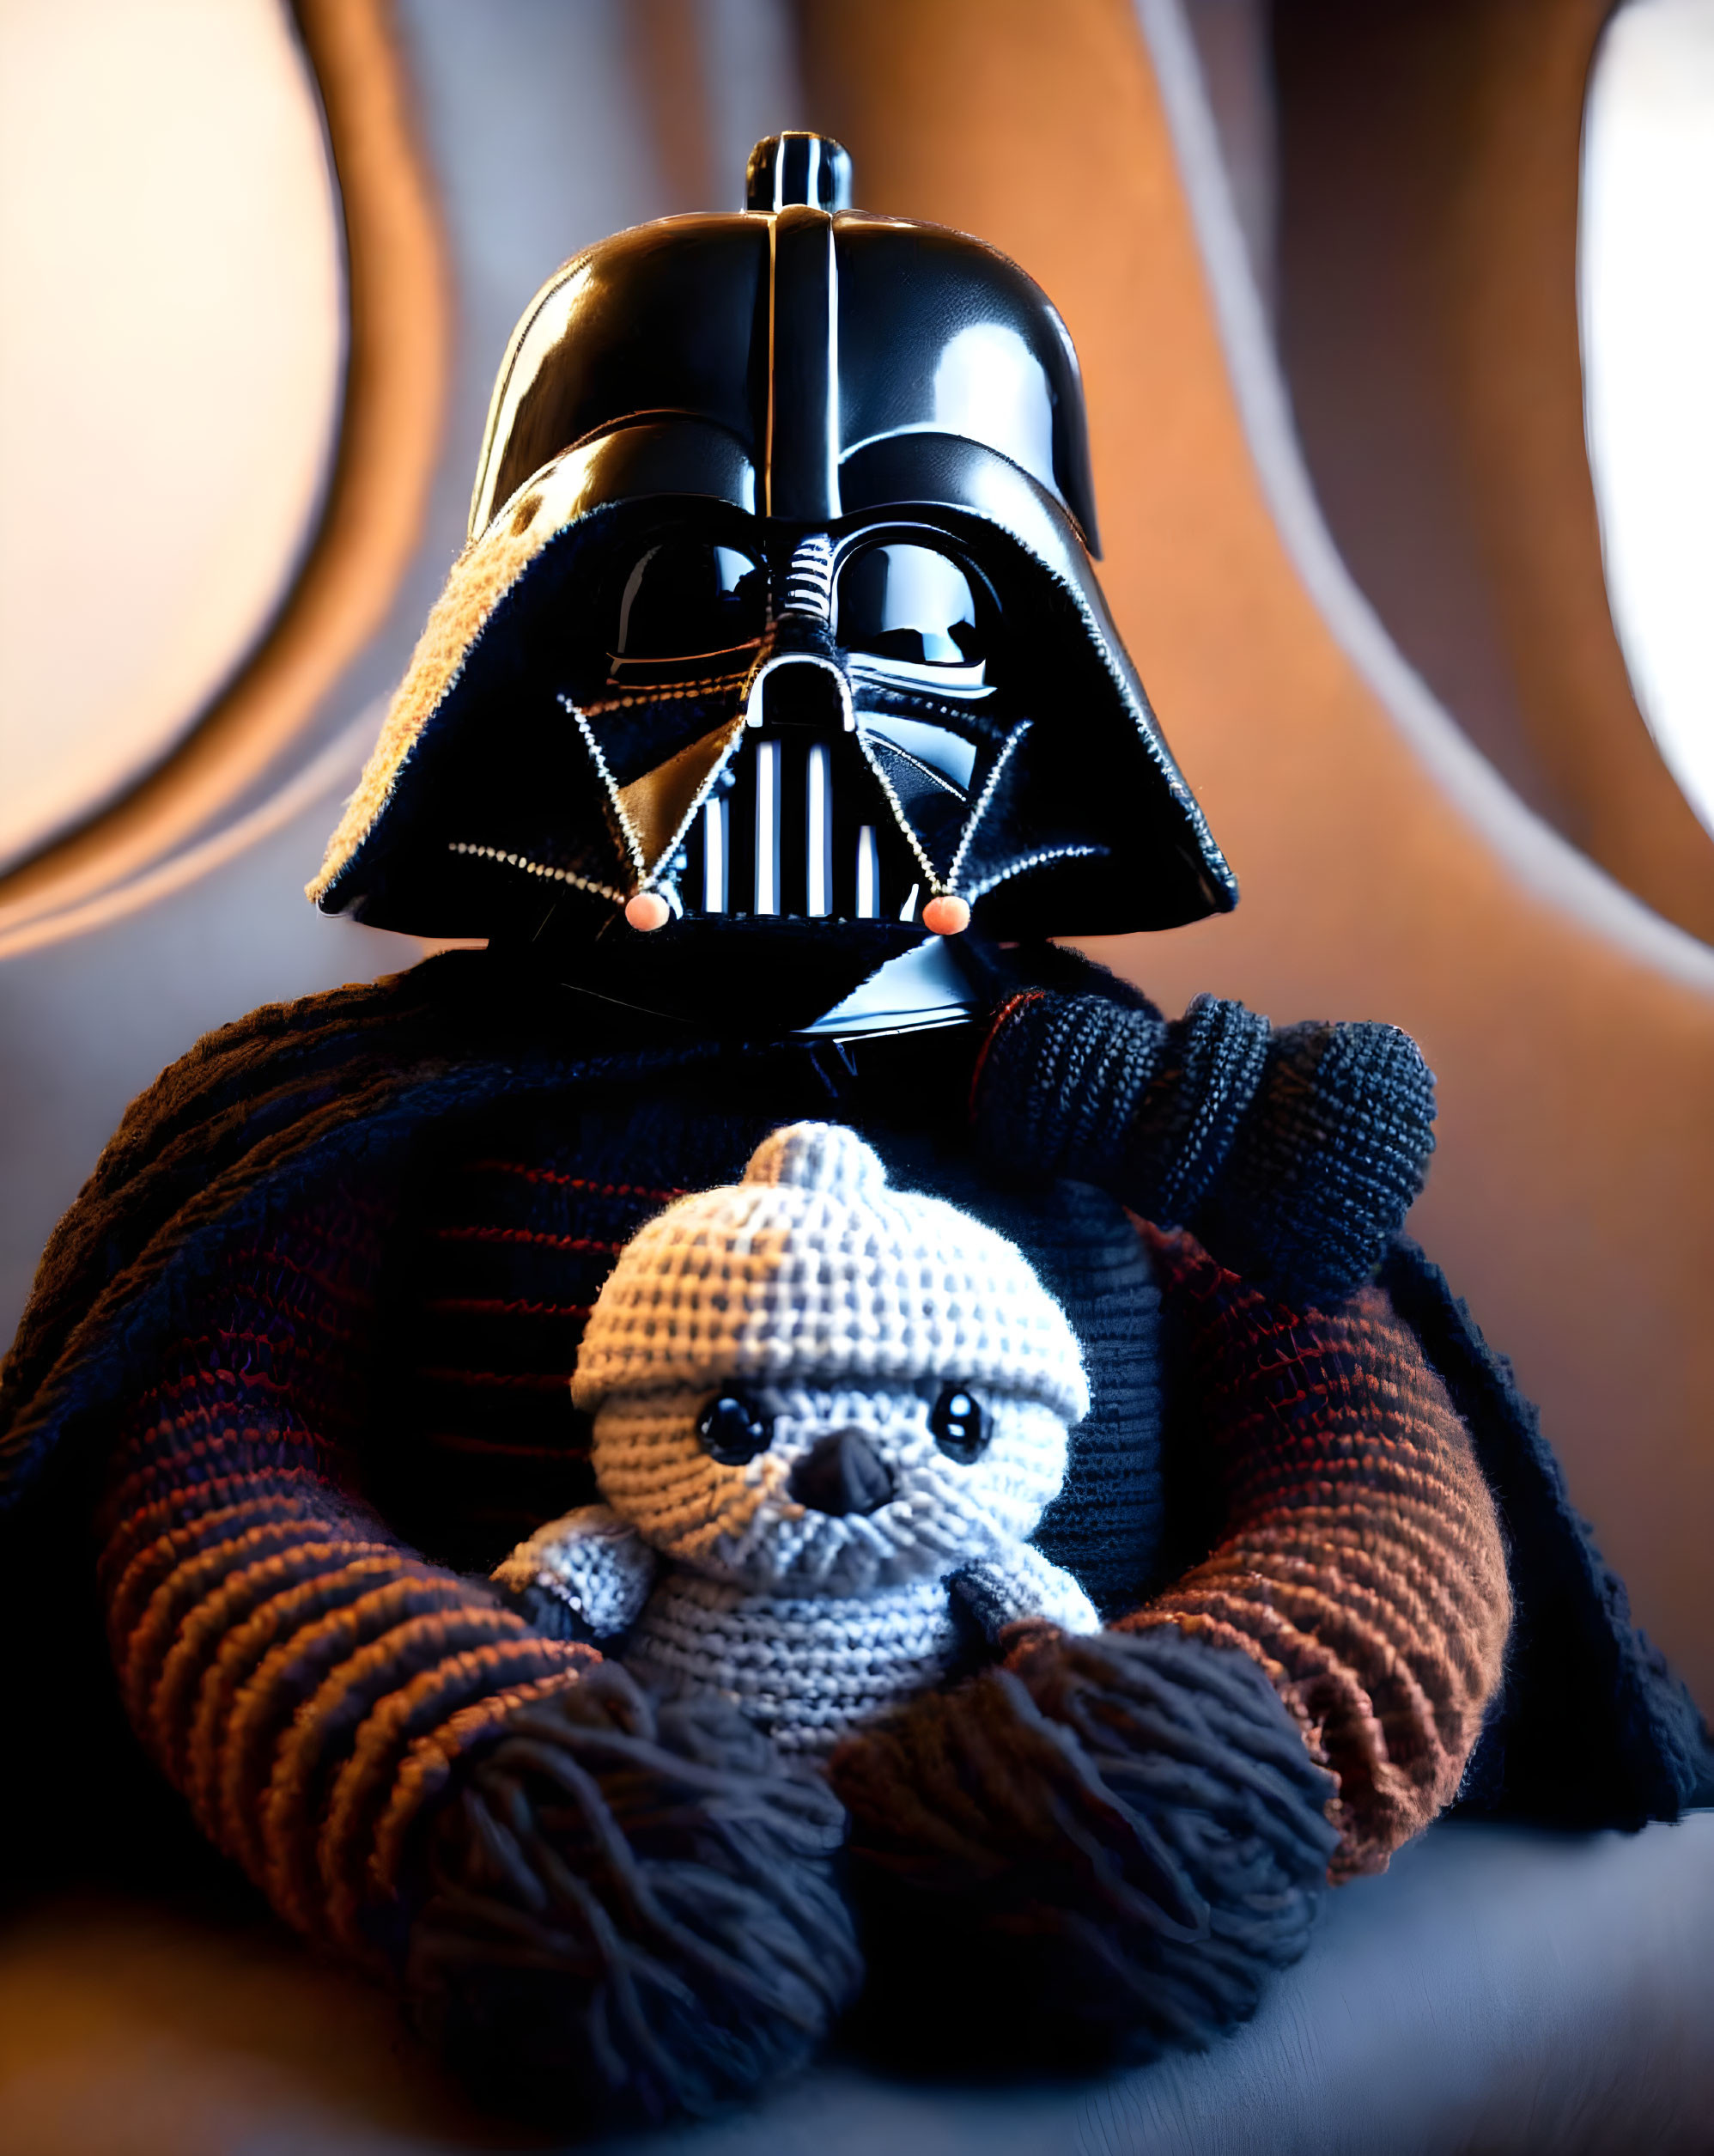 Sci-fi character with knitted toy in spaceship interior